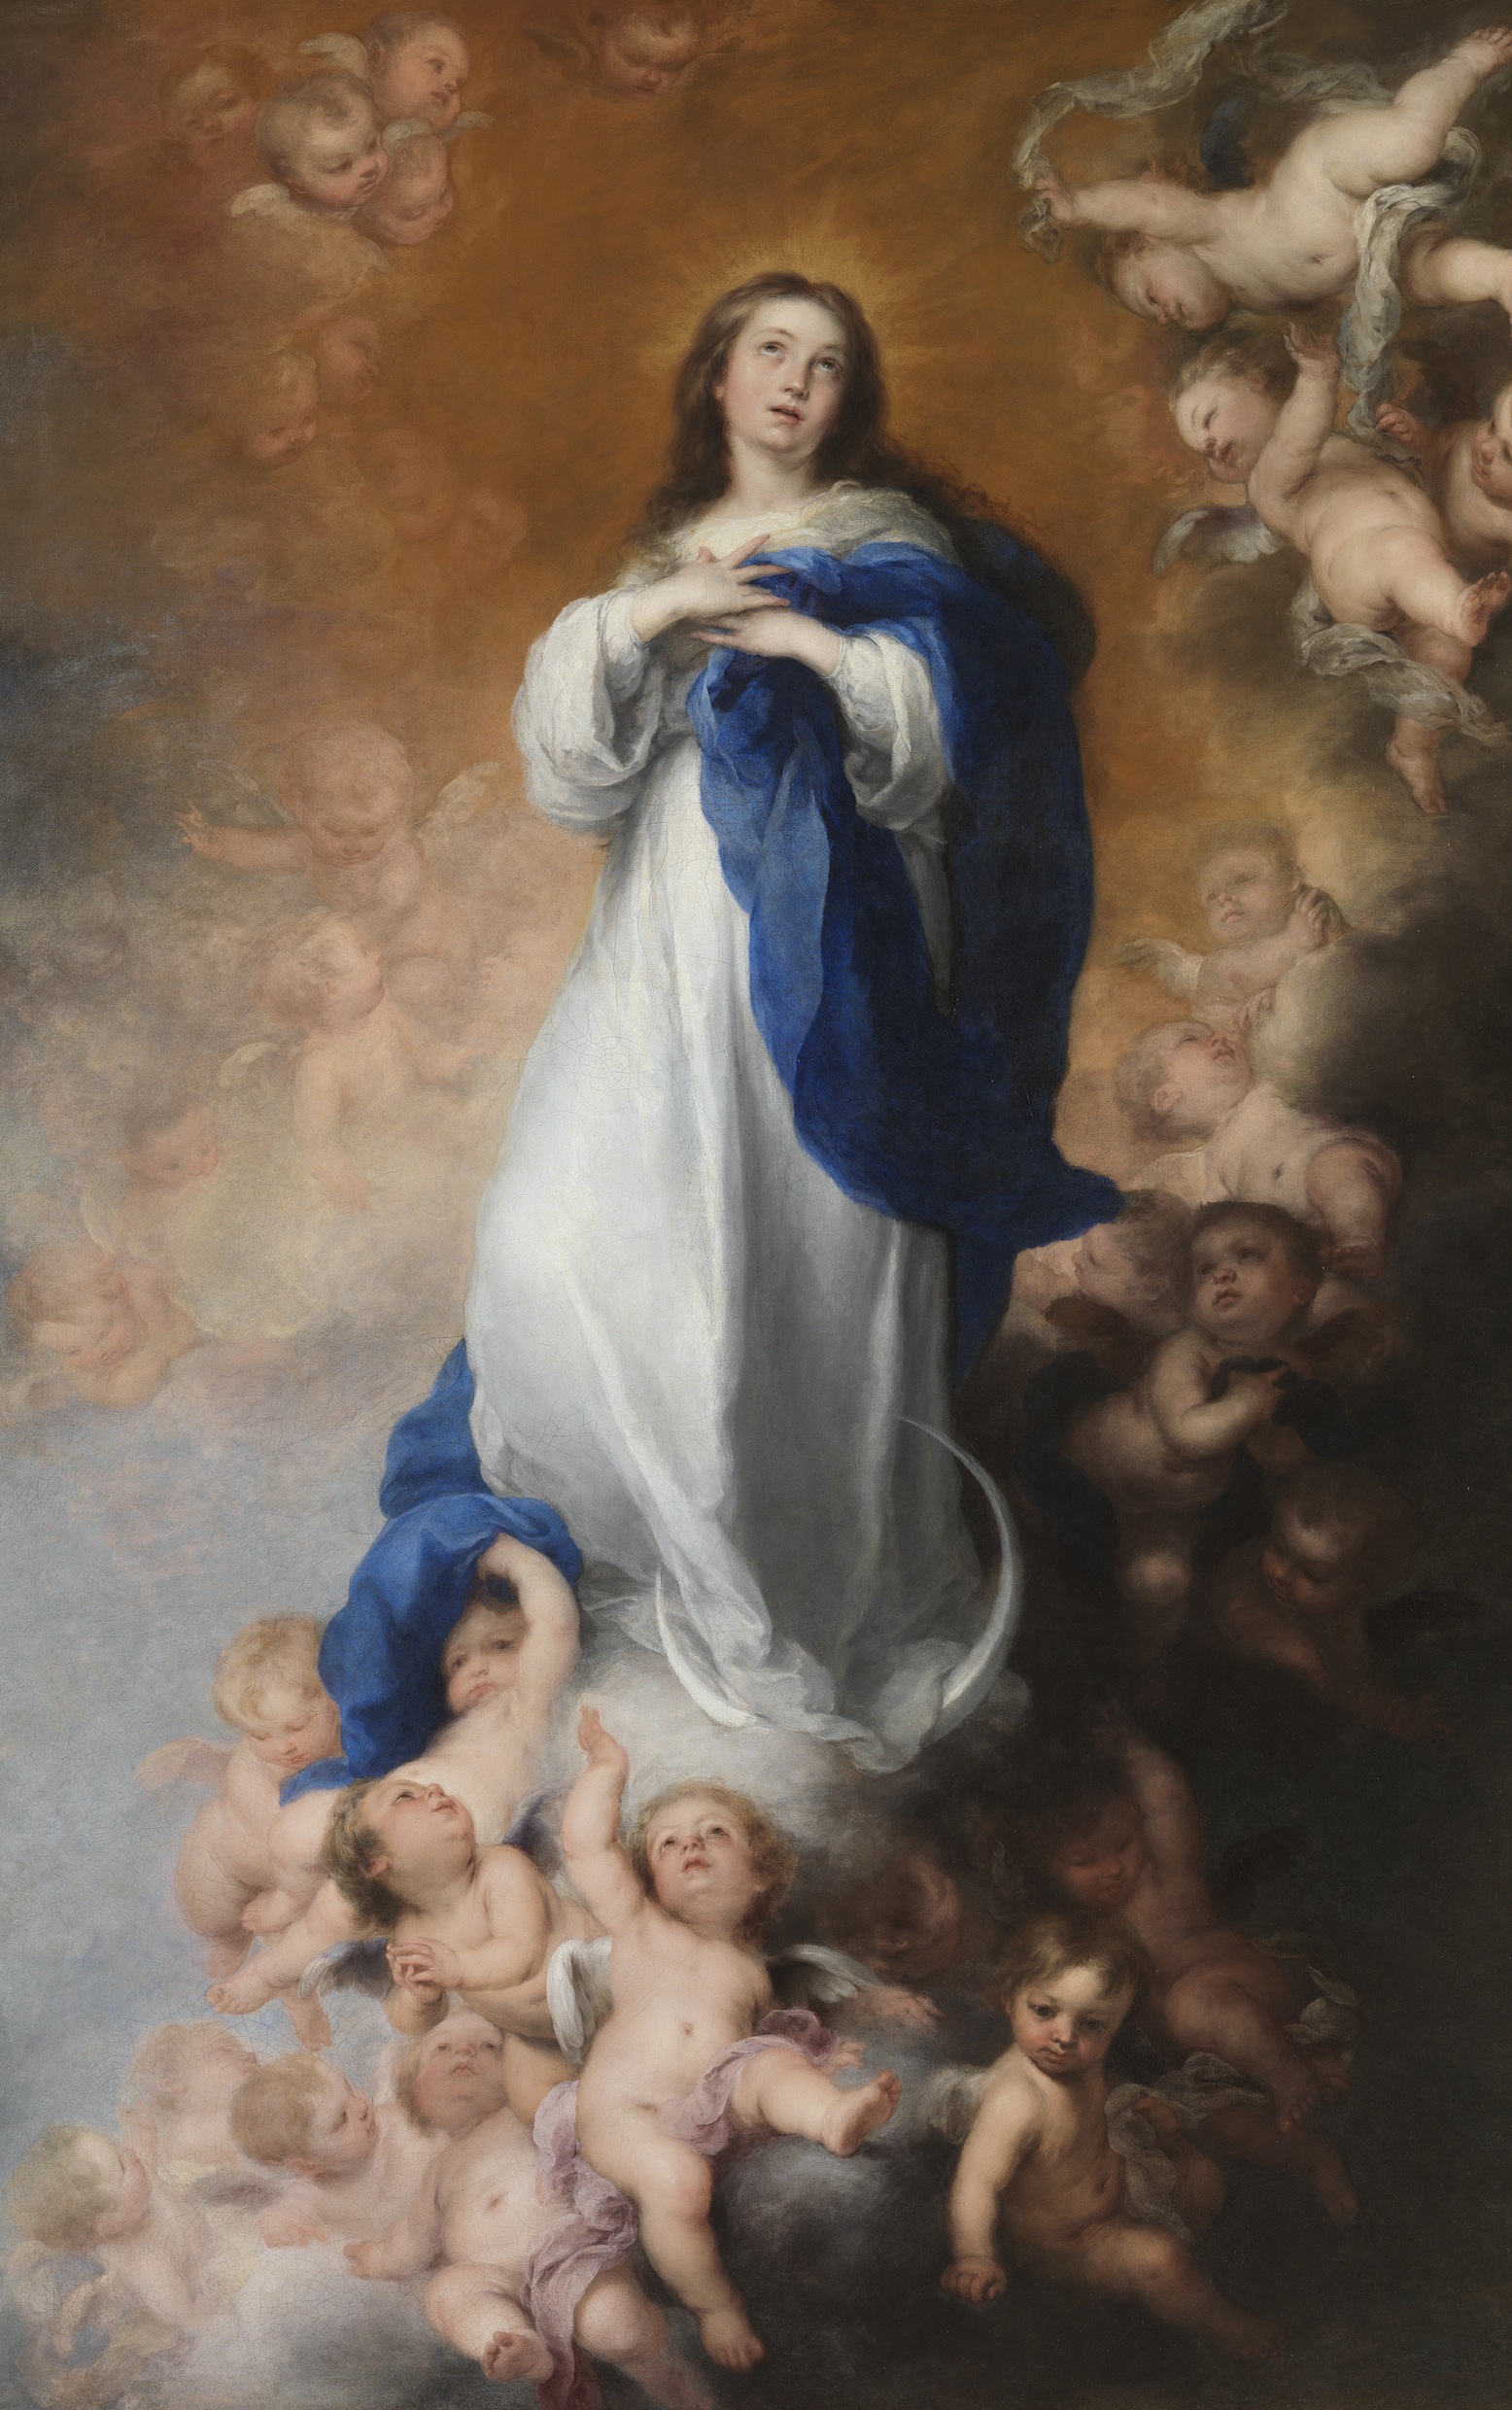 12 Inspiring Religious Paintings Their Meanings The Catholic Company